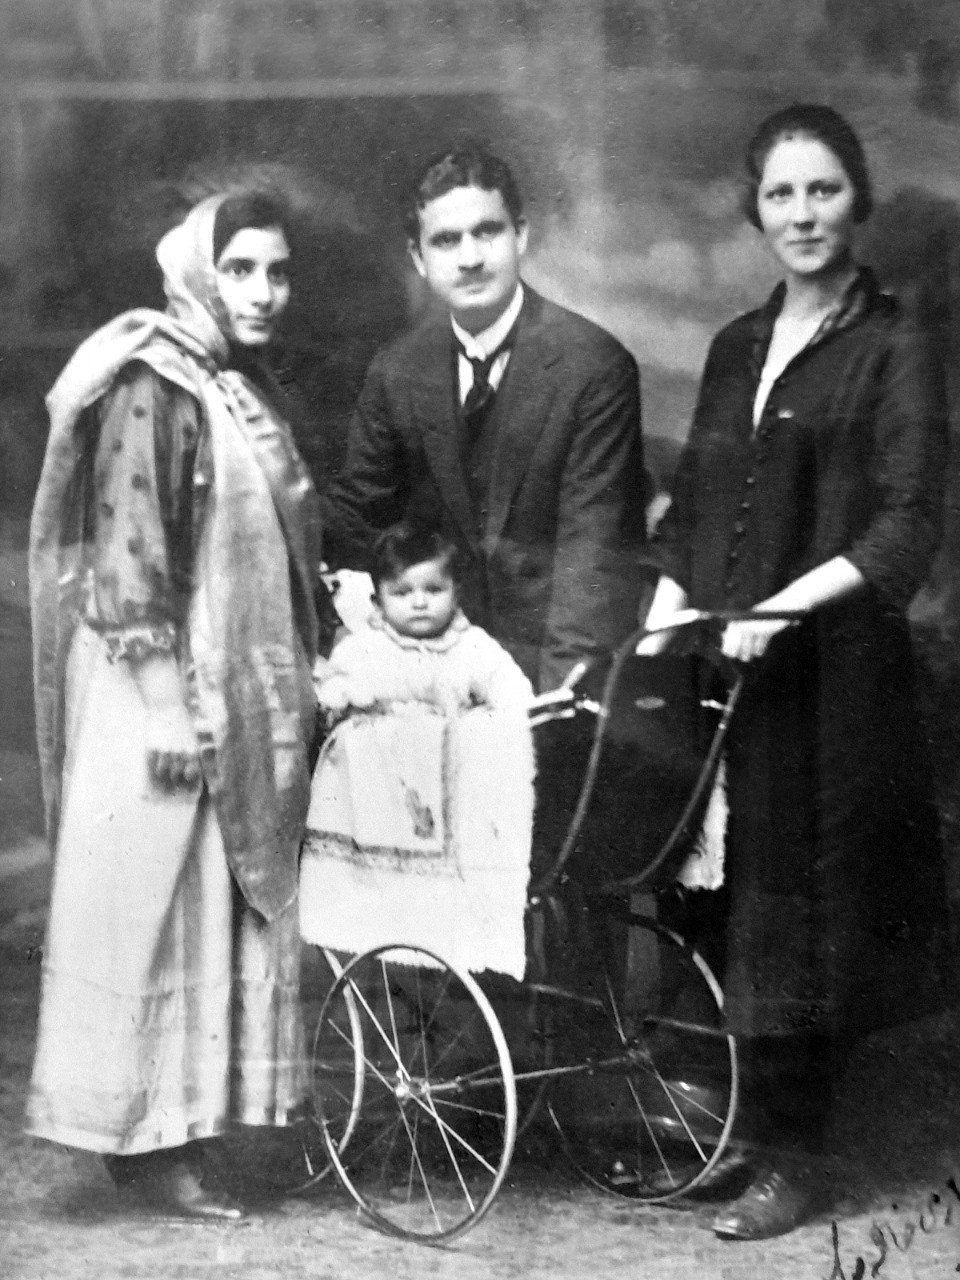 Dr Hakim in Heidelberg 1923 flanked by his wife Khadija, the German nanny Monica and infant son Arif Hakim